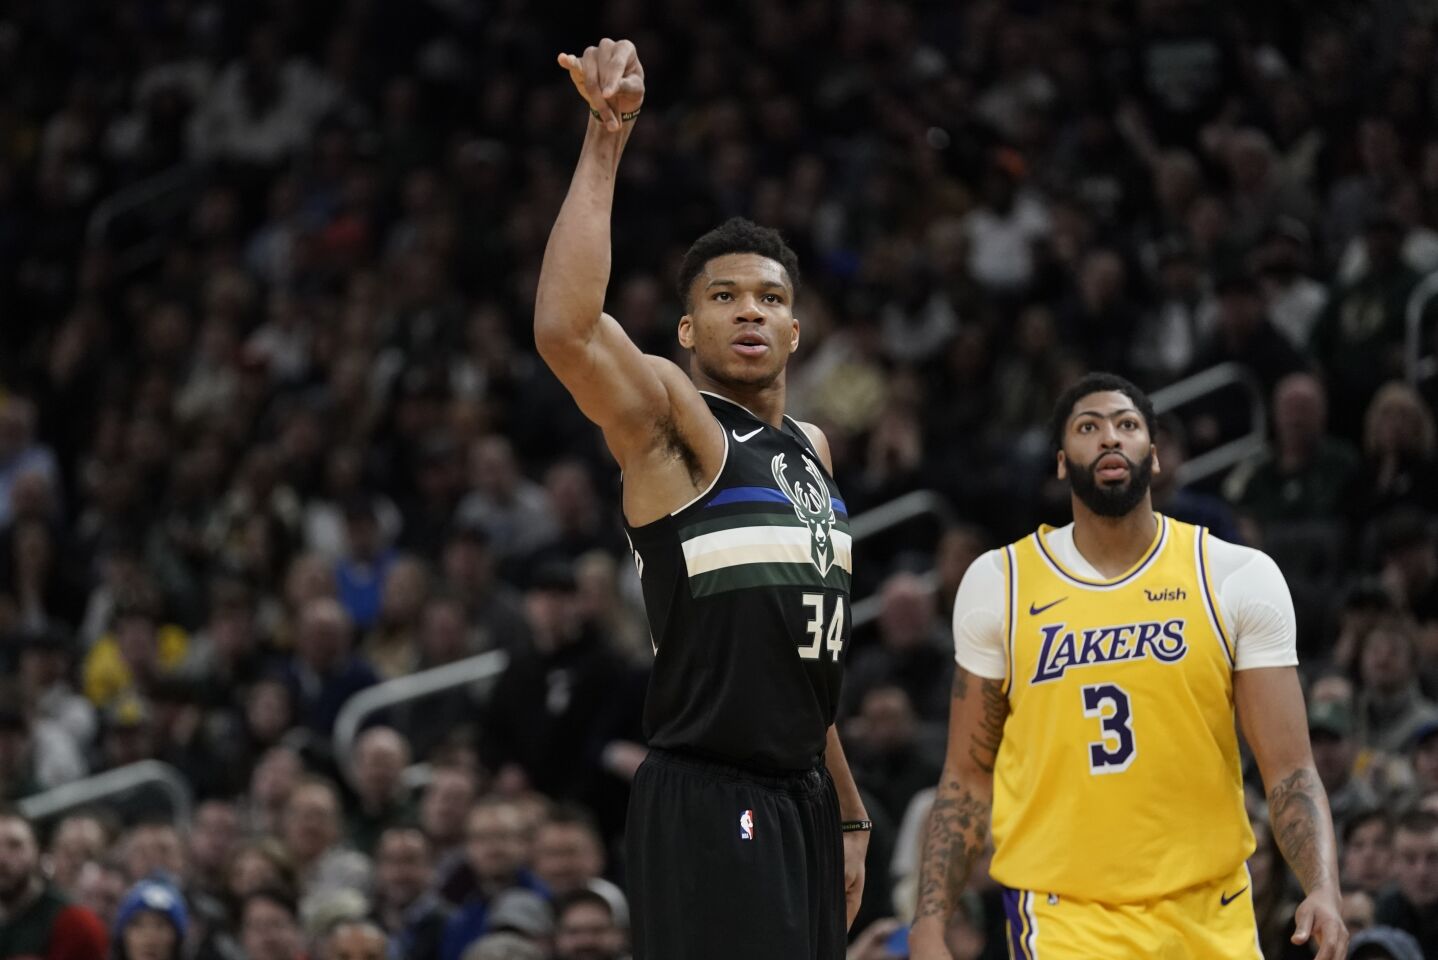 Giannis Antetokounmpo makes a three-pointer in front of Anthony Davis during the second half of a game Dec. 19.